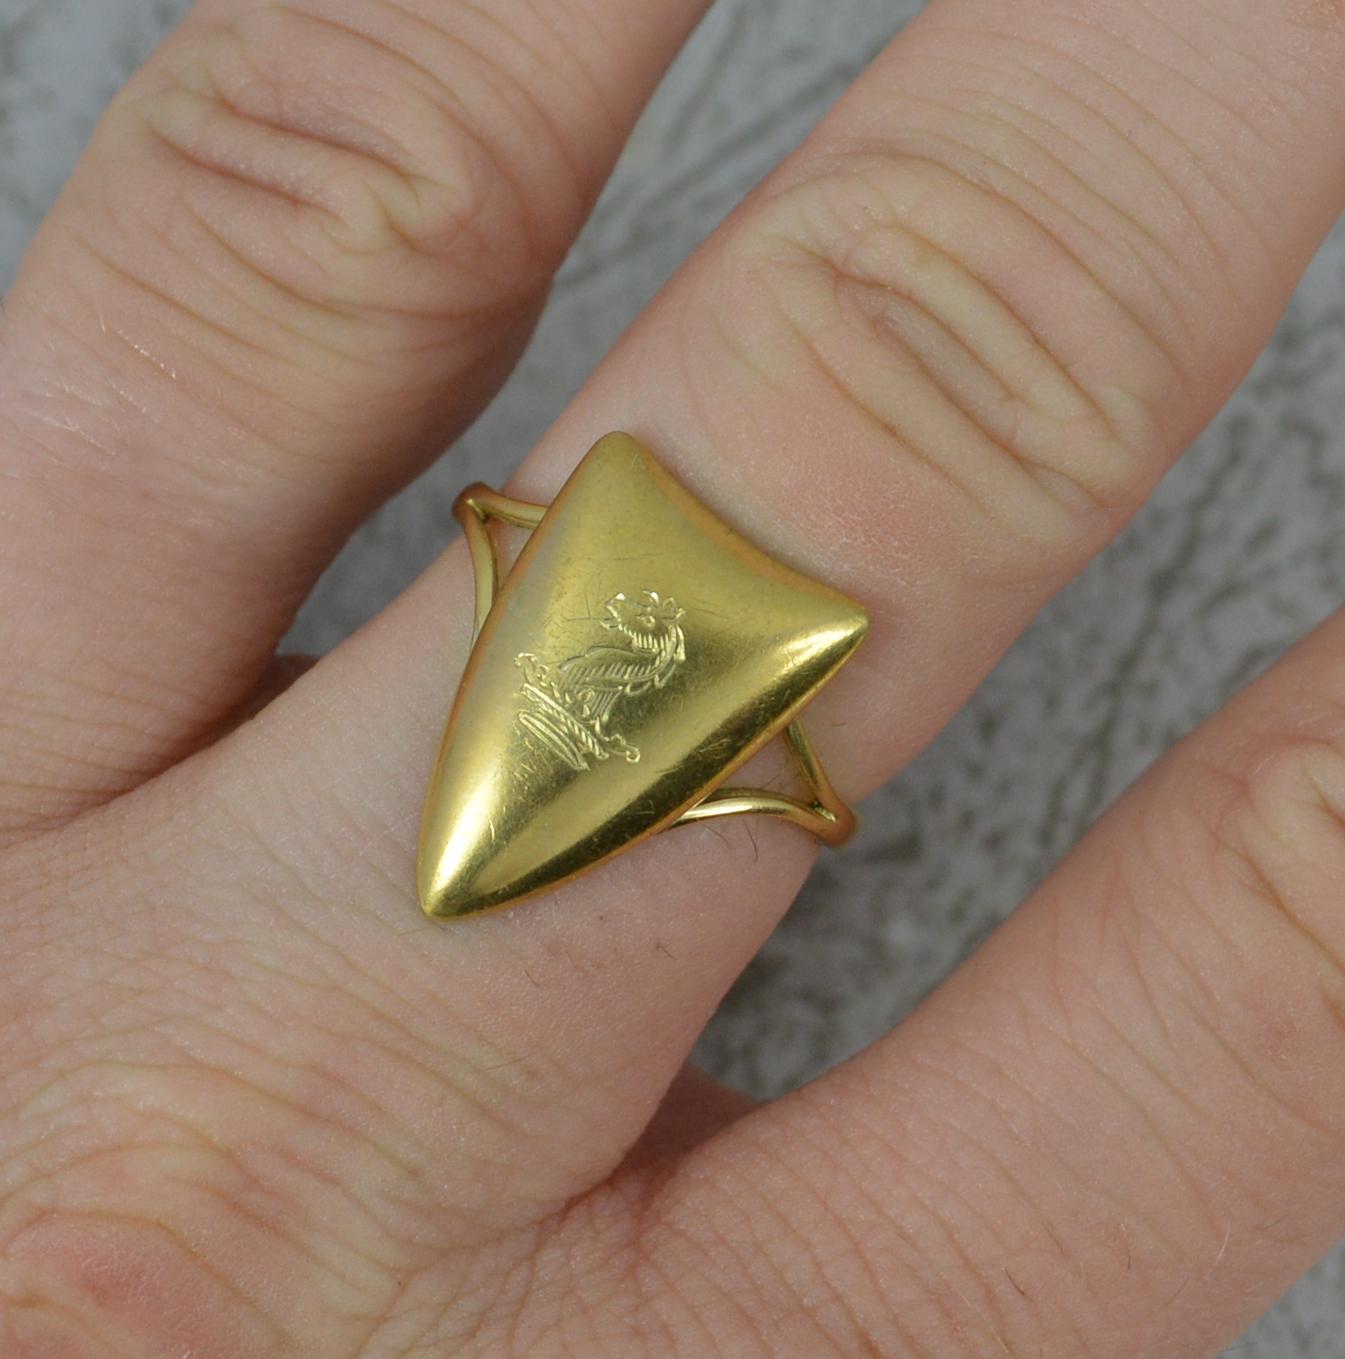 A superb antique signet ring, circa 1900.
Solid 15 carat yellow gold example.
Set with shield shaped head with crest engraving depicting a horse head on crown.
12mm x 18mm head.

CONDITION ; Very good. Clean and polished band. Solid example. A